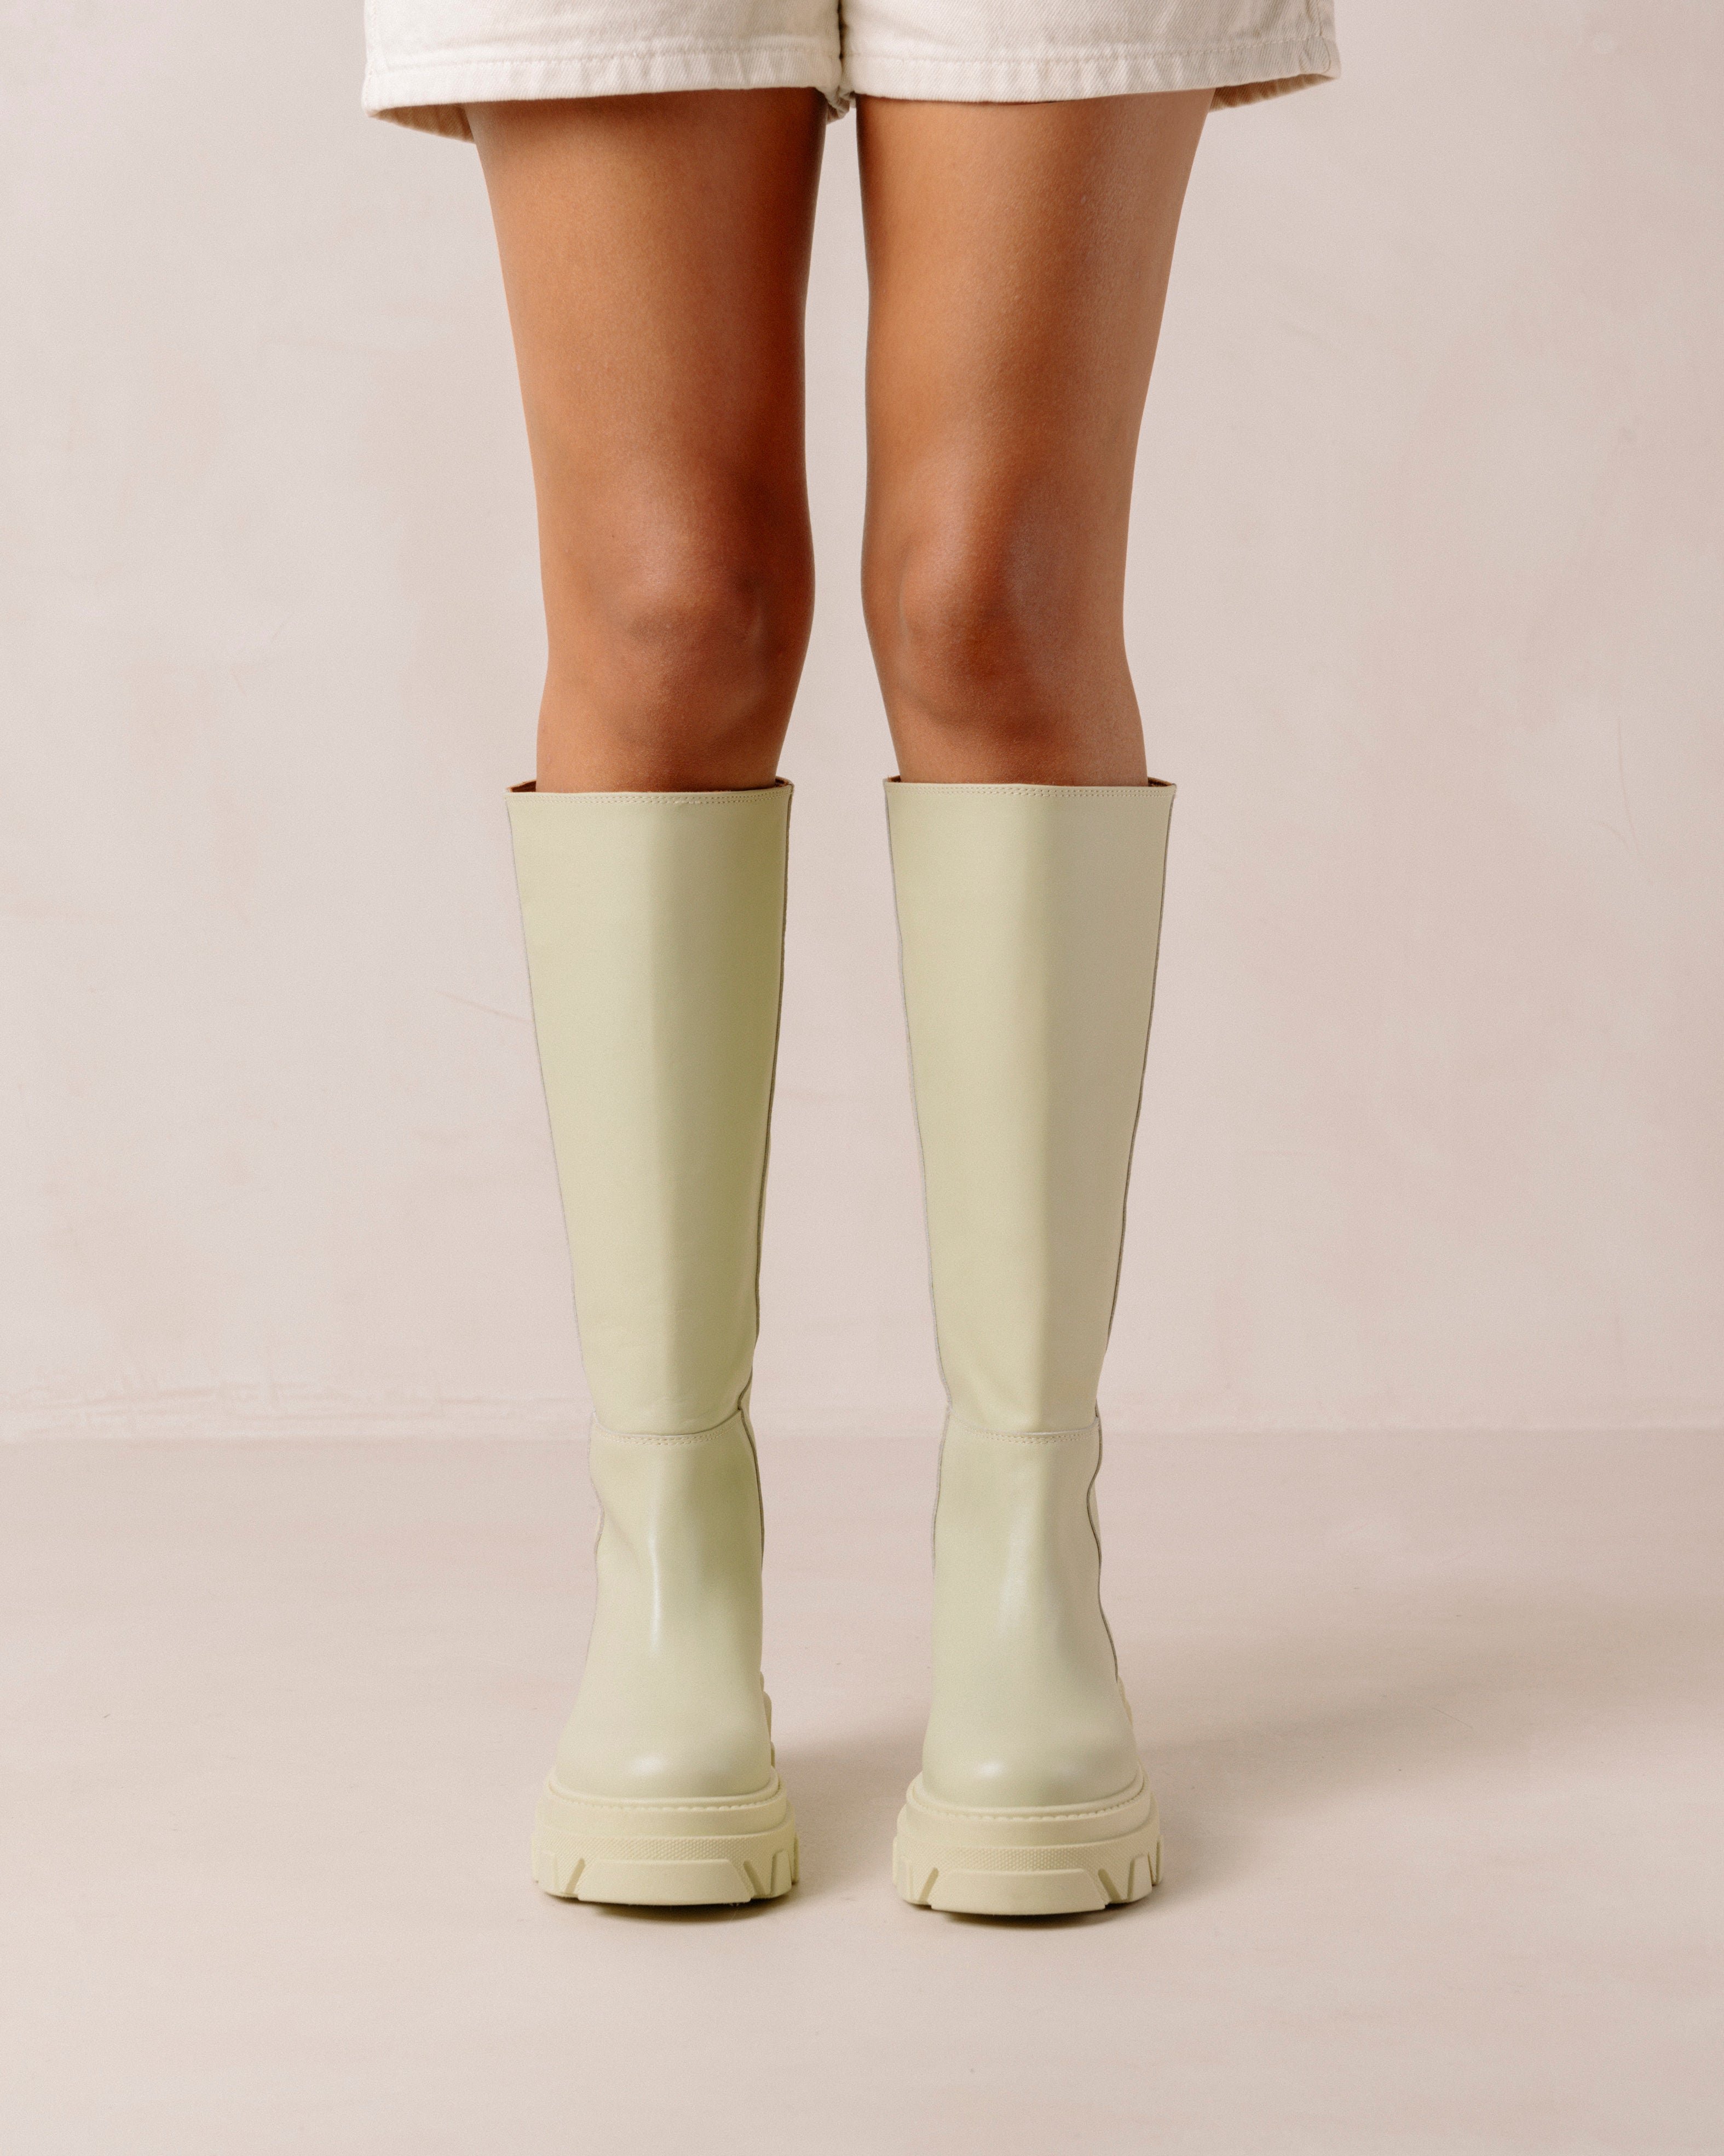 White rubber boots